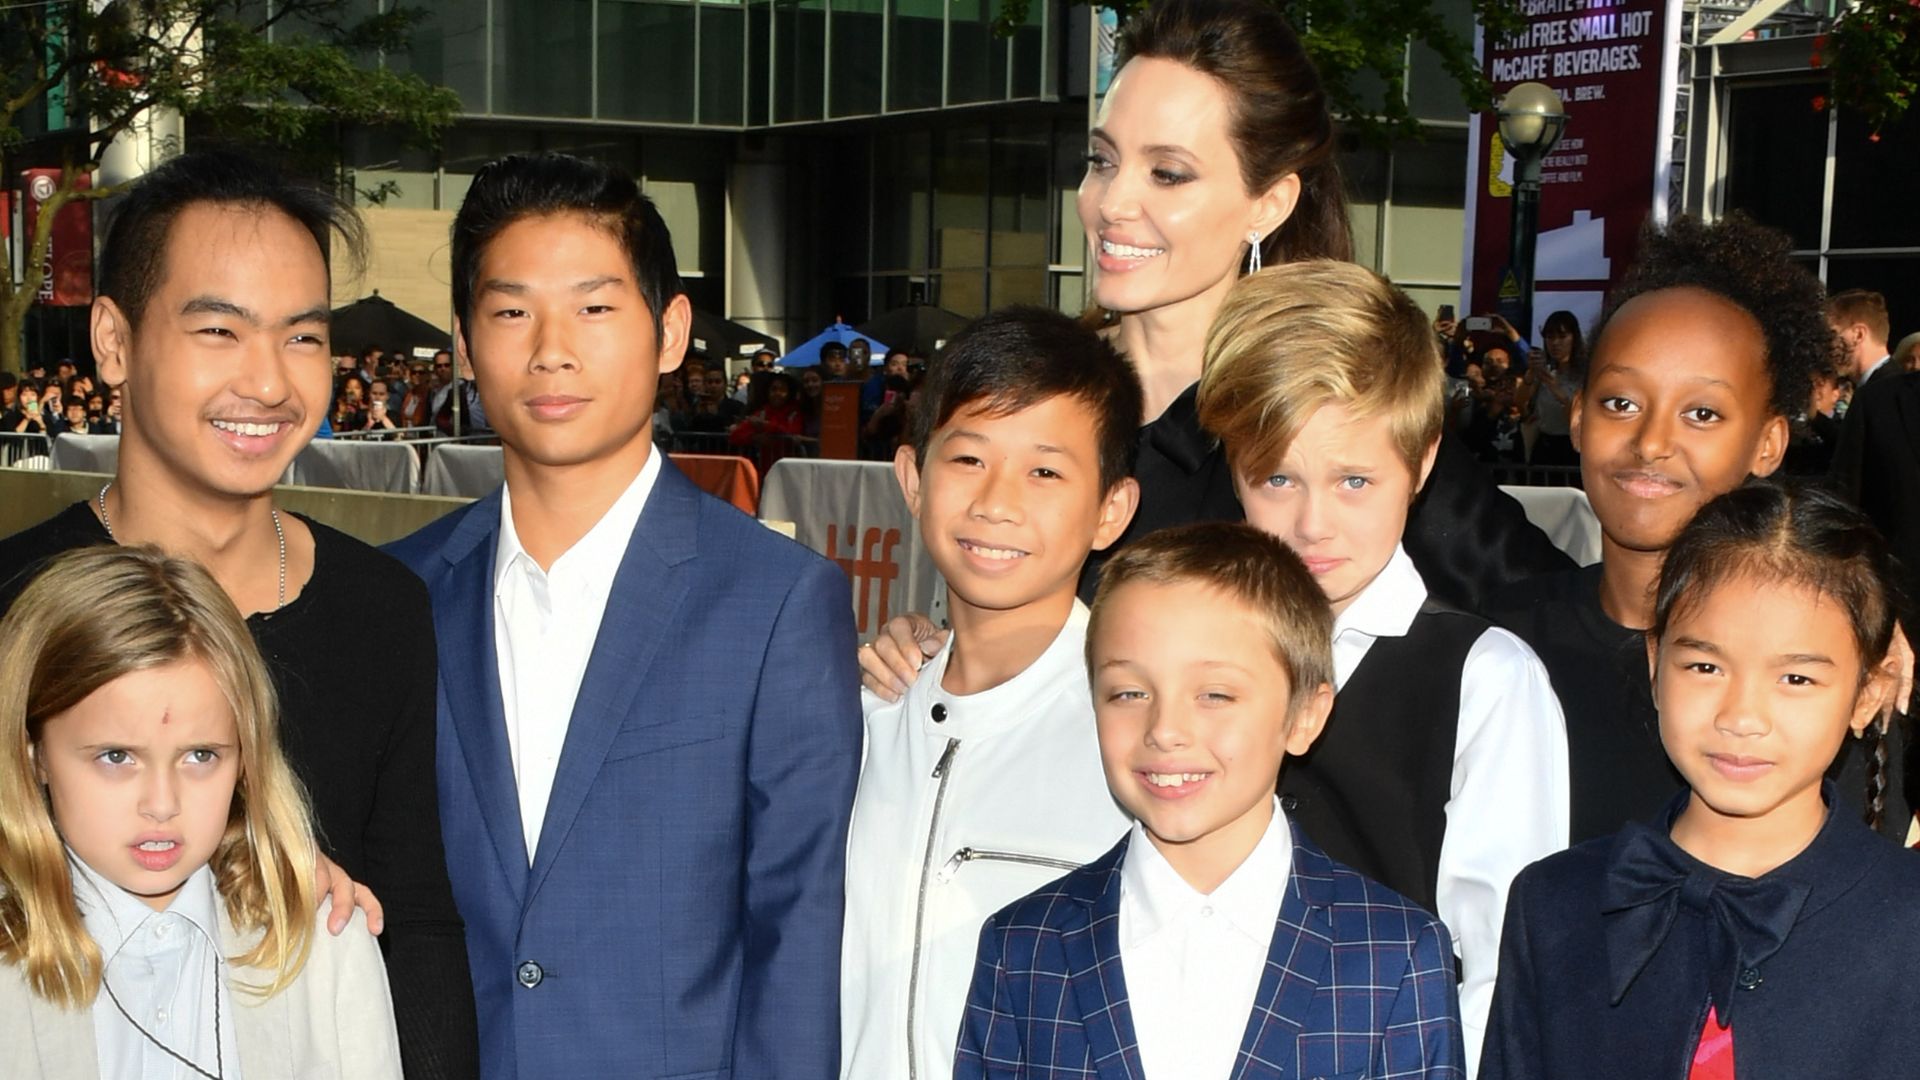 Angelina Jolie surrounded by her children and two child stars at a red carpet film premiere